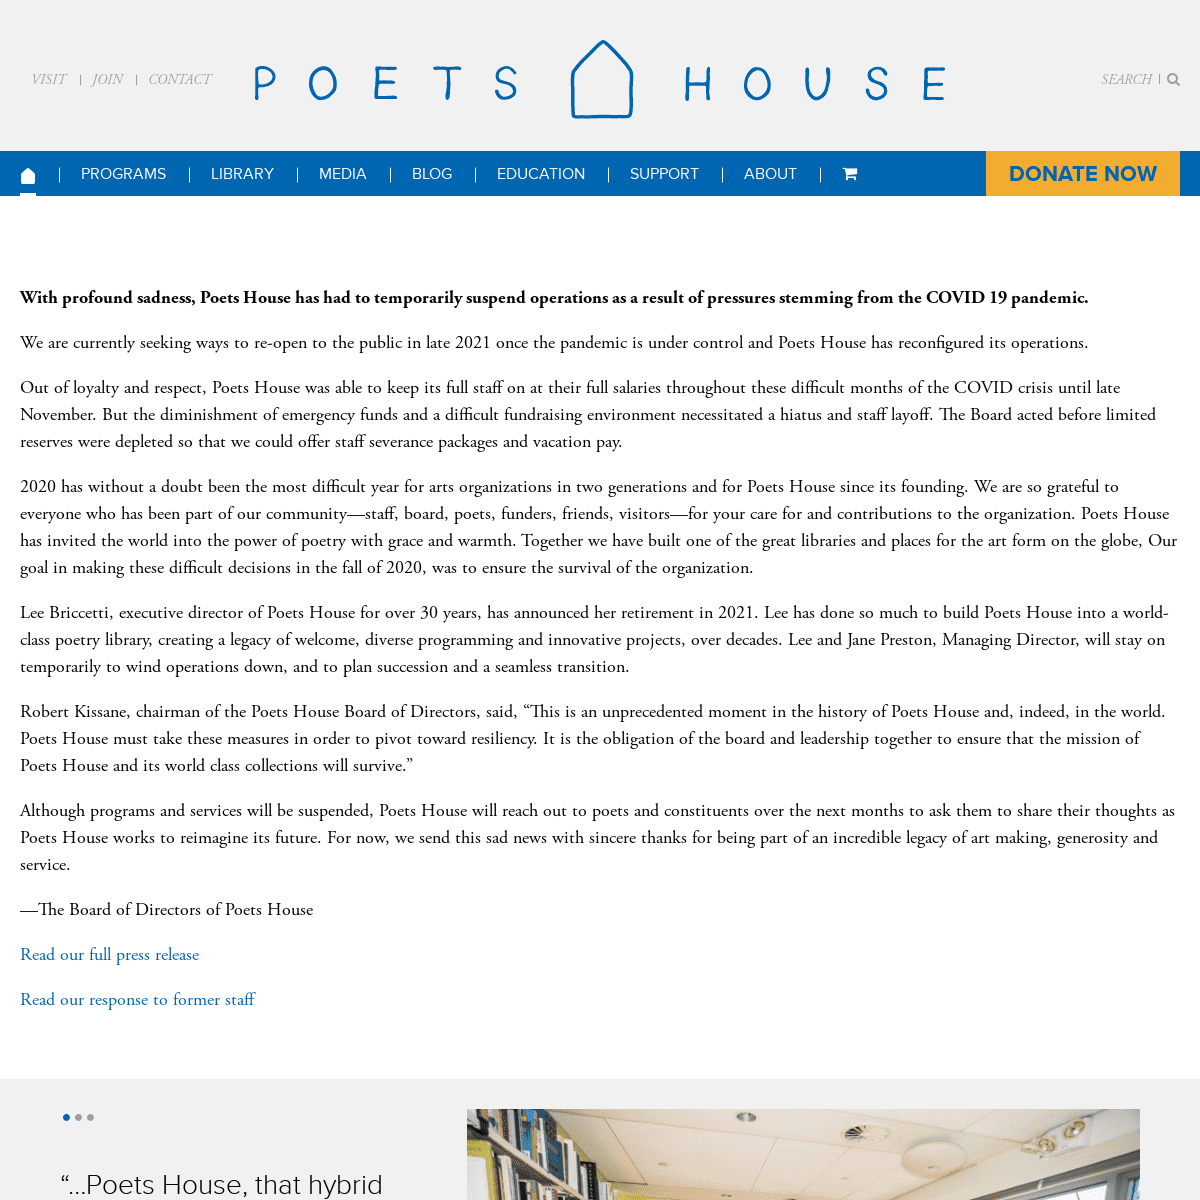 A complete backup of https://poetshouse.org